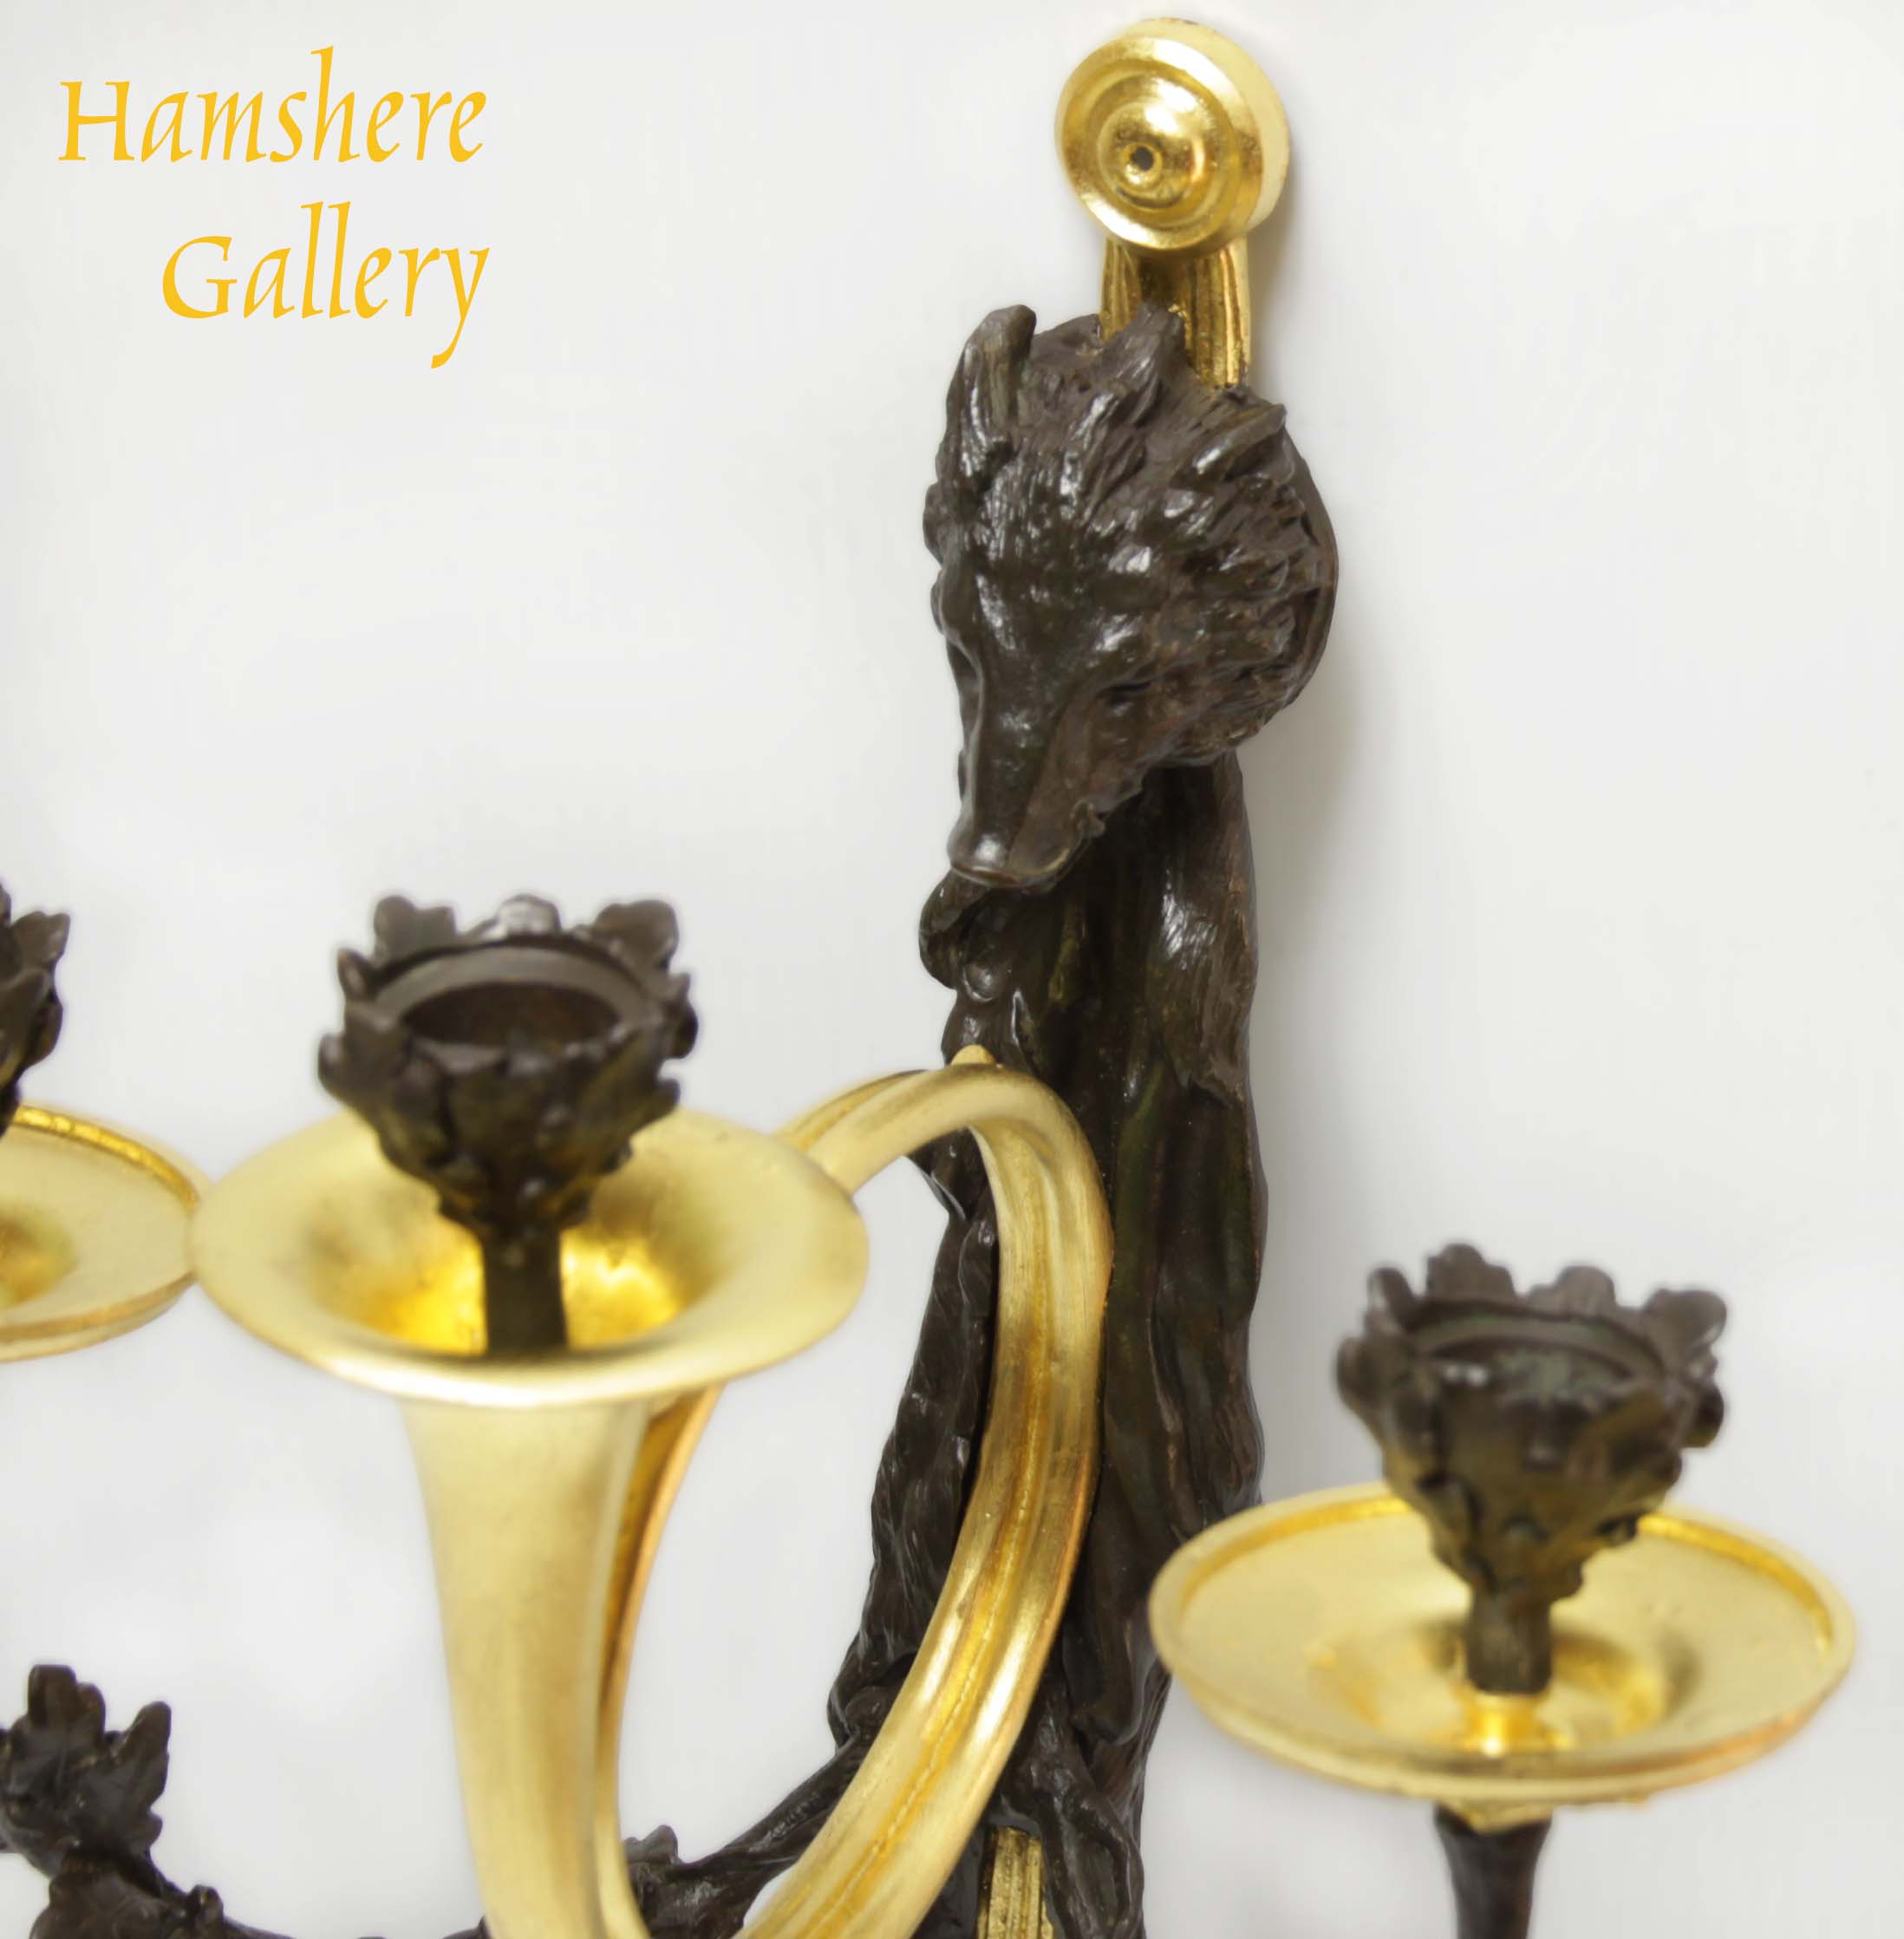 Click to see full size: 19th century, French bronze dorÃ© hunting / â€˜chasseâ€™ boar French horn wall sconces â€˜appliquesâ€™- 19th century, French bronze dorÃ© hunting / â€˜chasseâ€™ boar French horn wall sconces â€˜appliquesâ€™